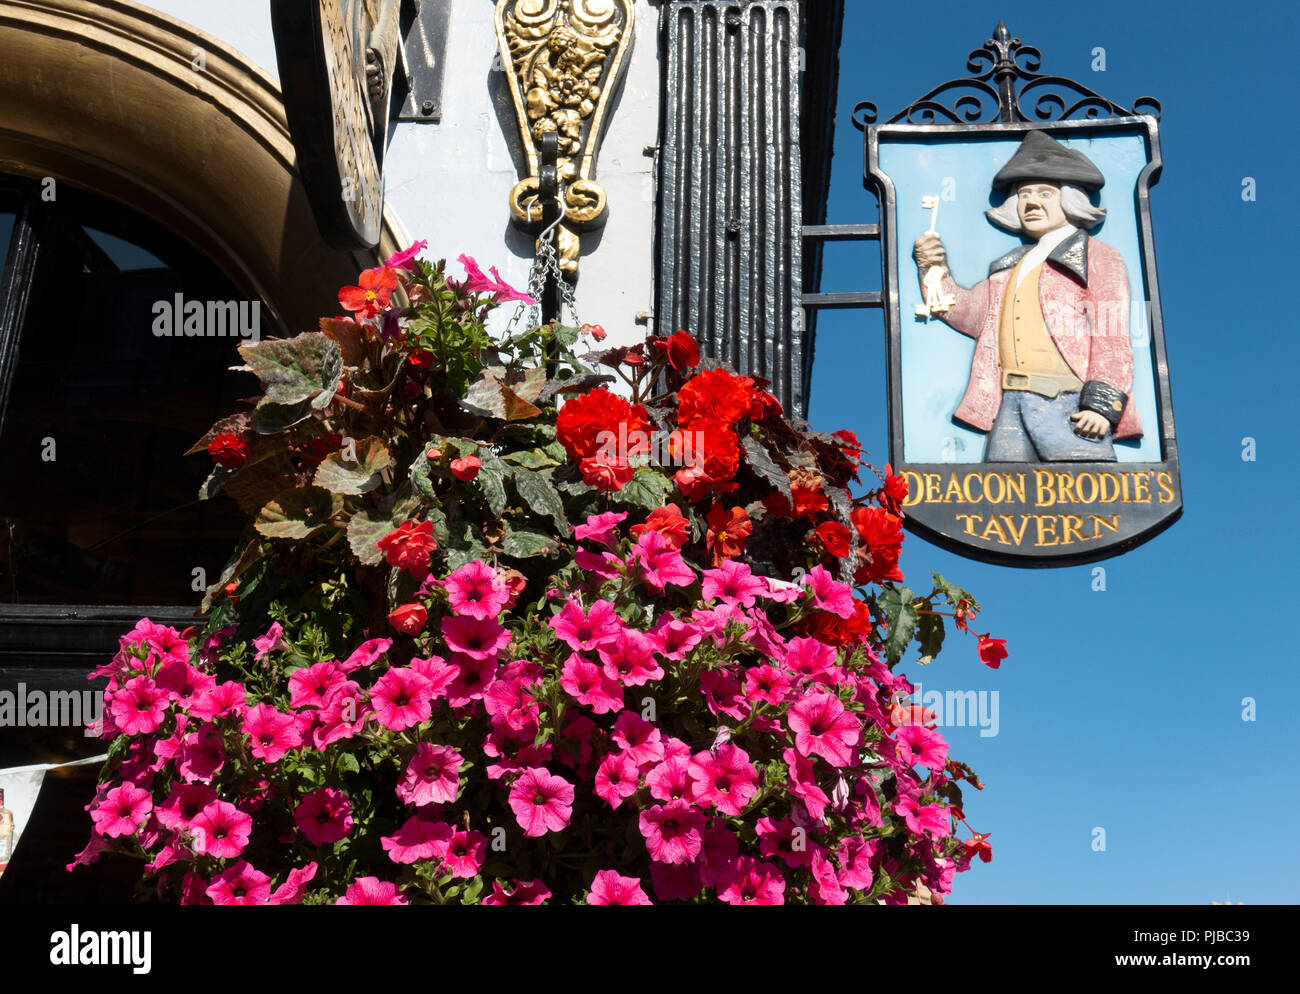 Deacon Brodie's pub sign and hanging flower basket on Edinburgh's Royal Mile in Scotland, UK Stock Photo